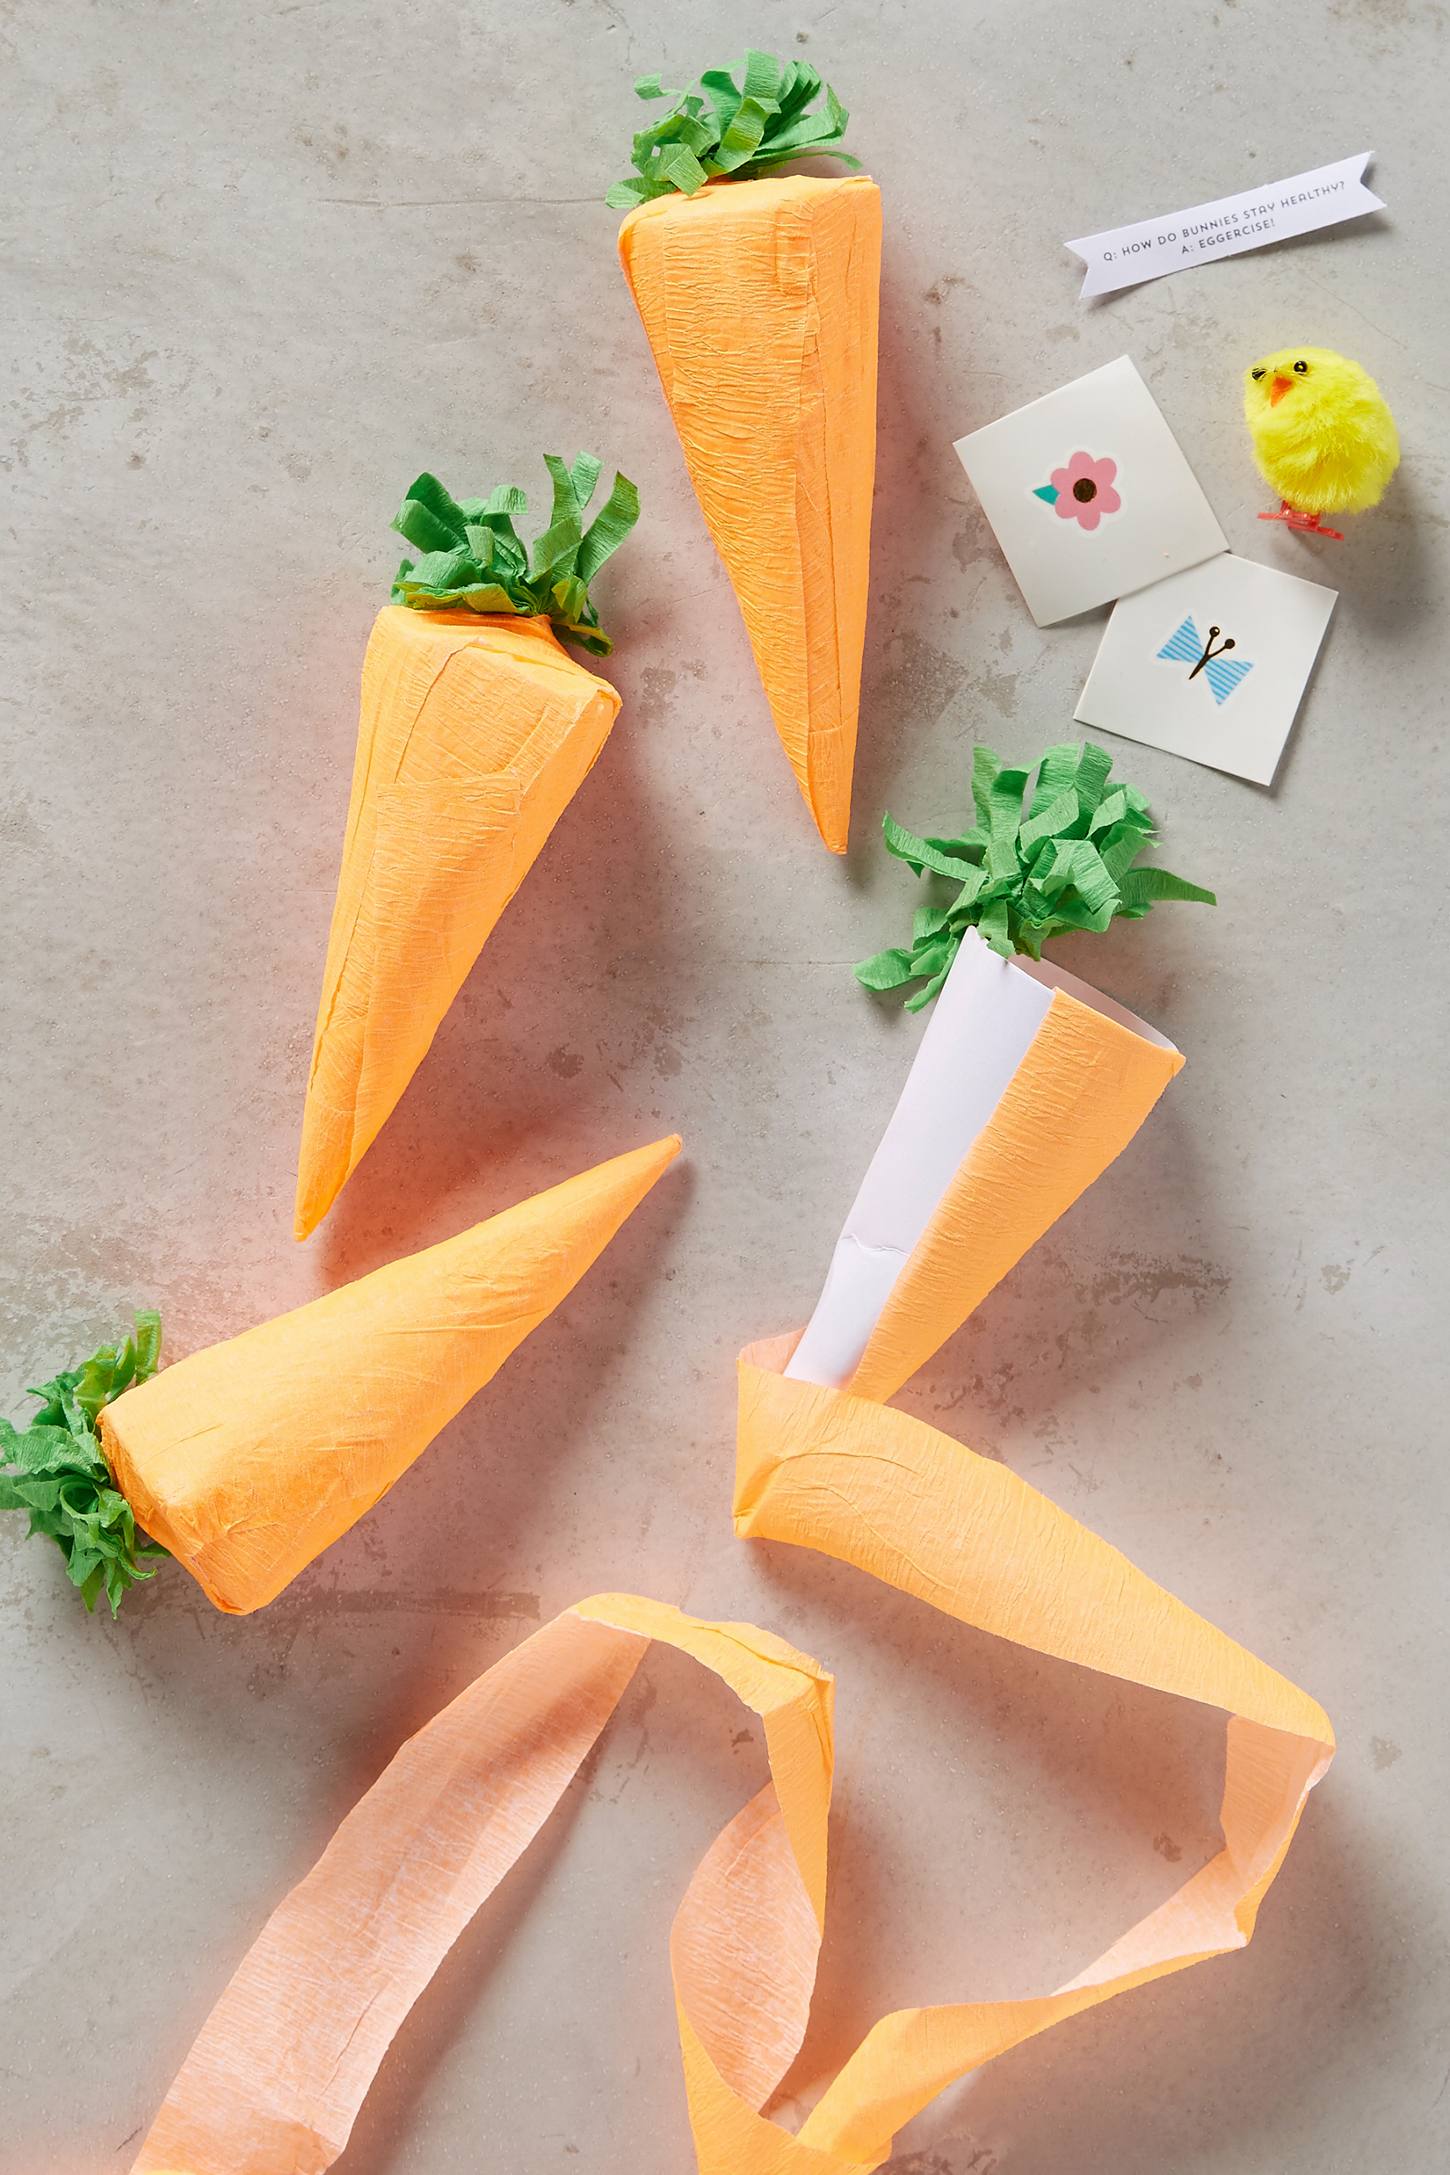 Surprise carrots from Anthropologie